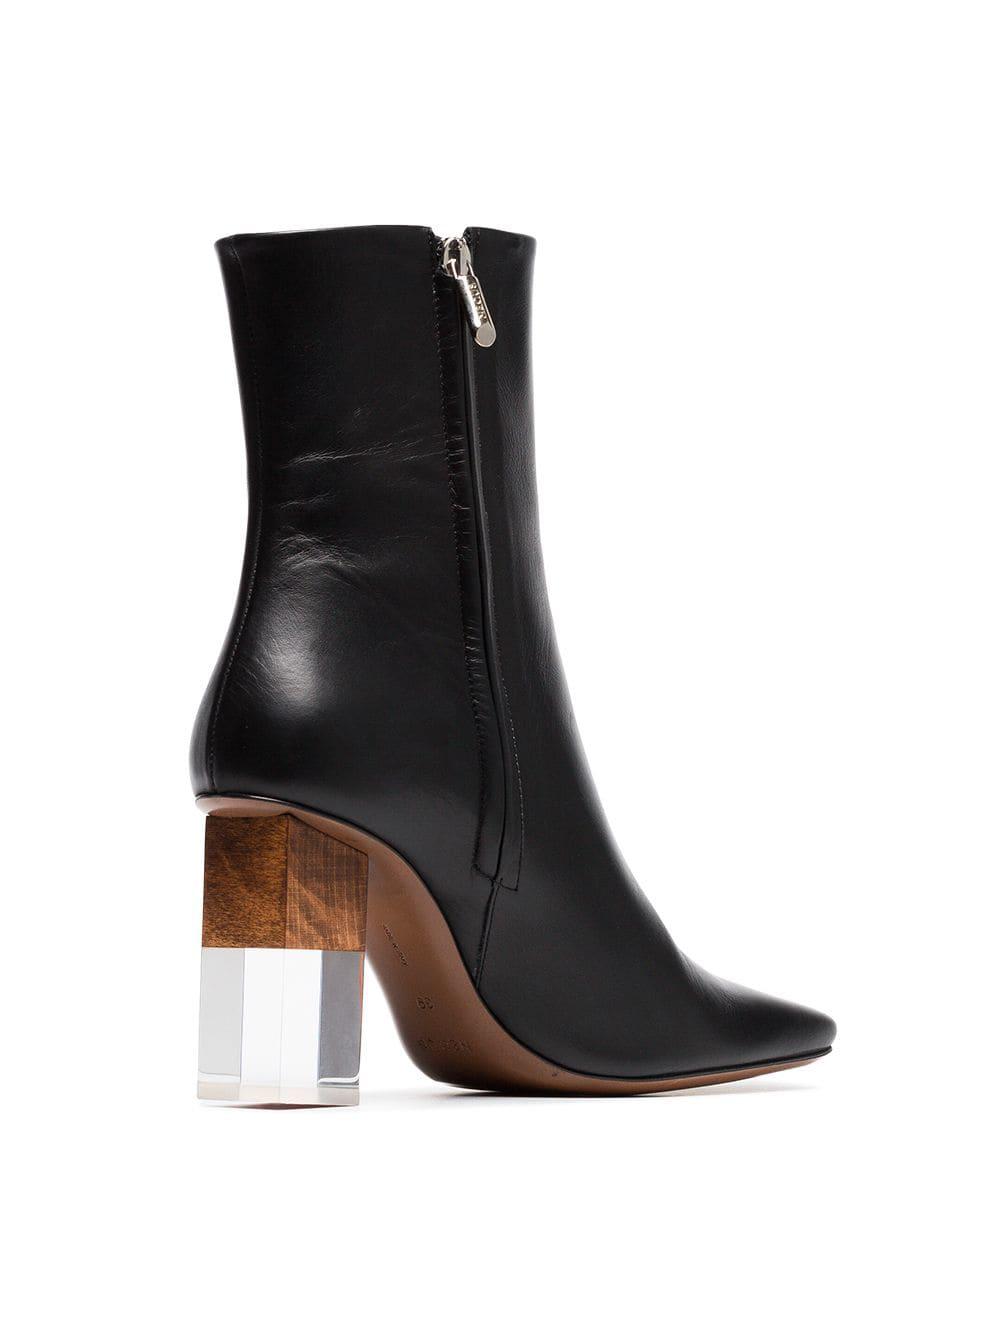 Neous Hea 80 Leather Ankle Boots in Black - Lyst